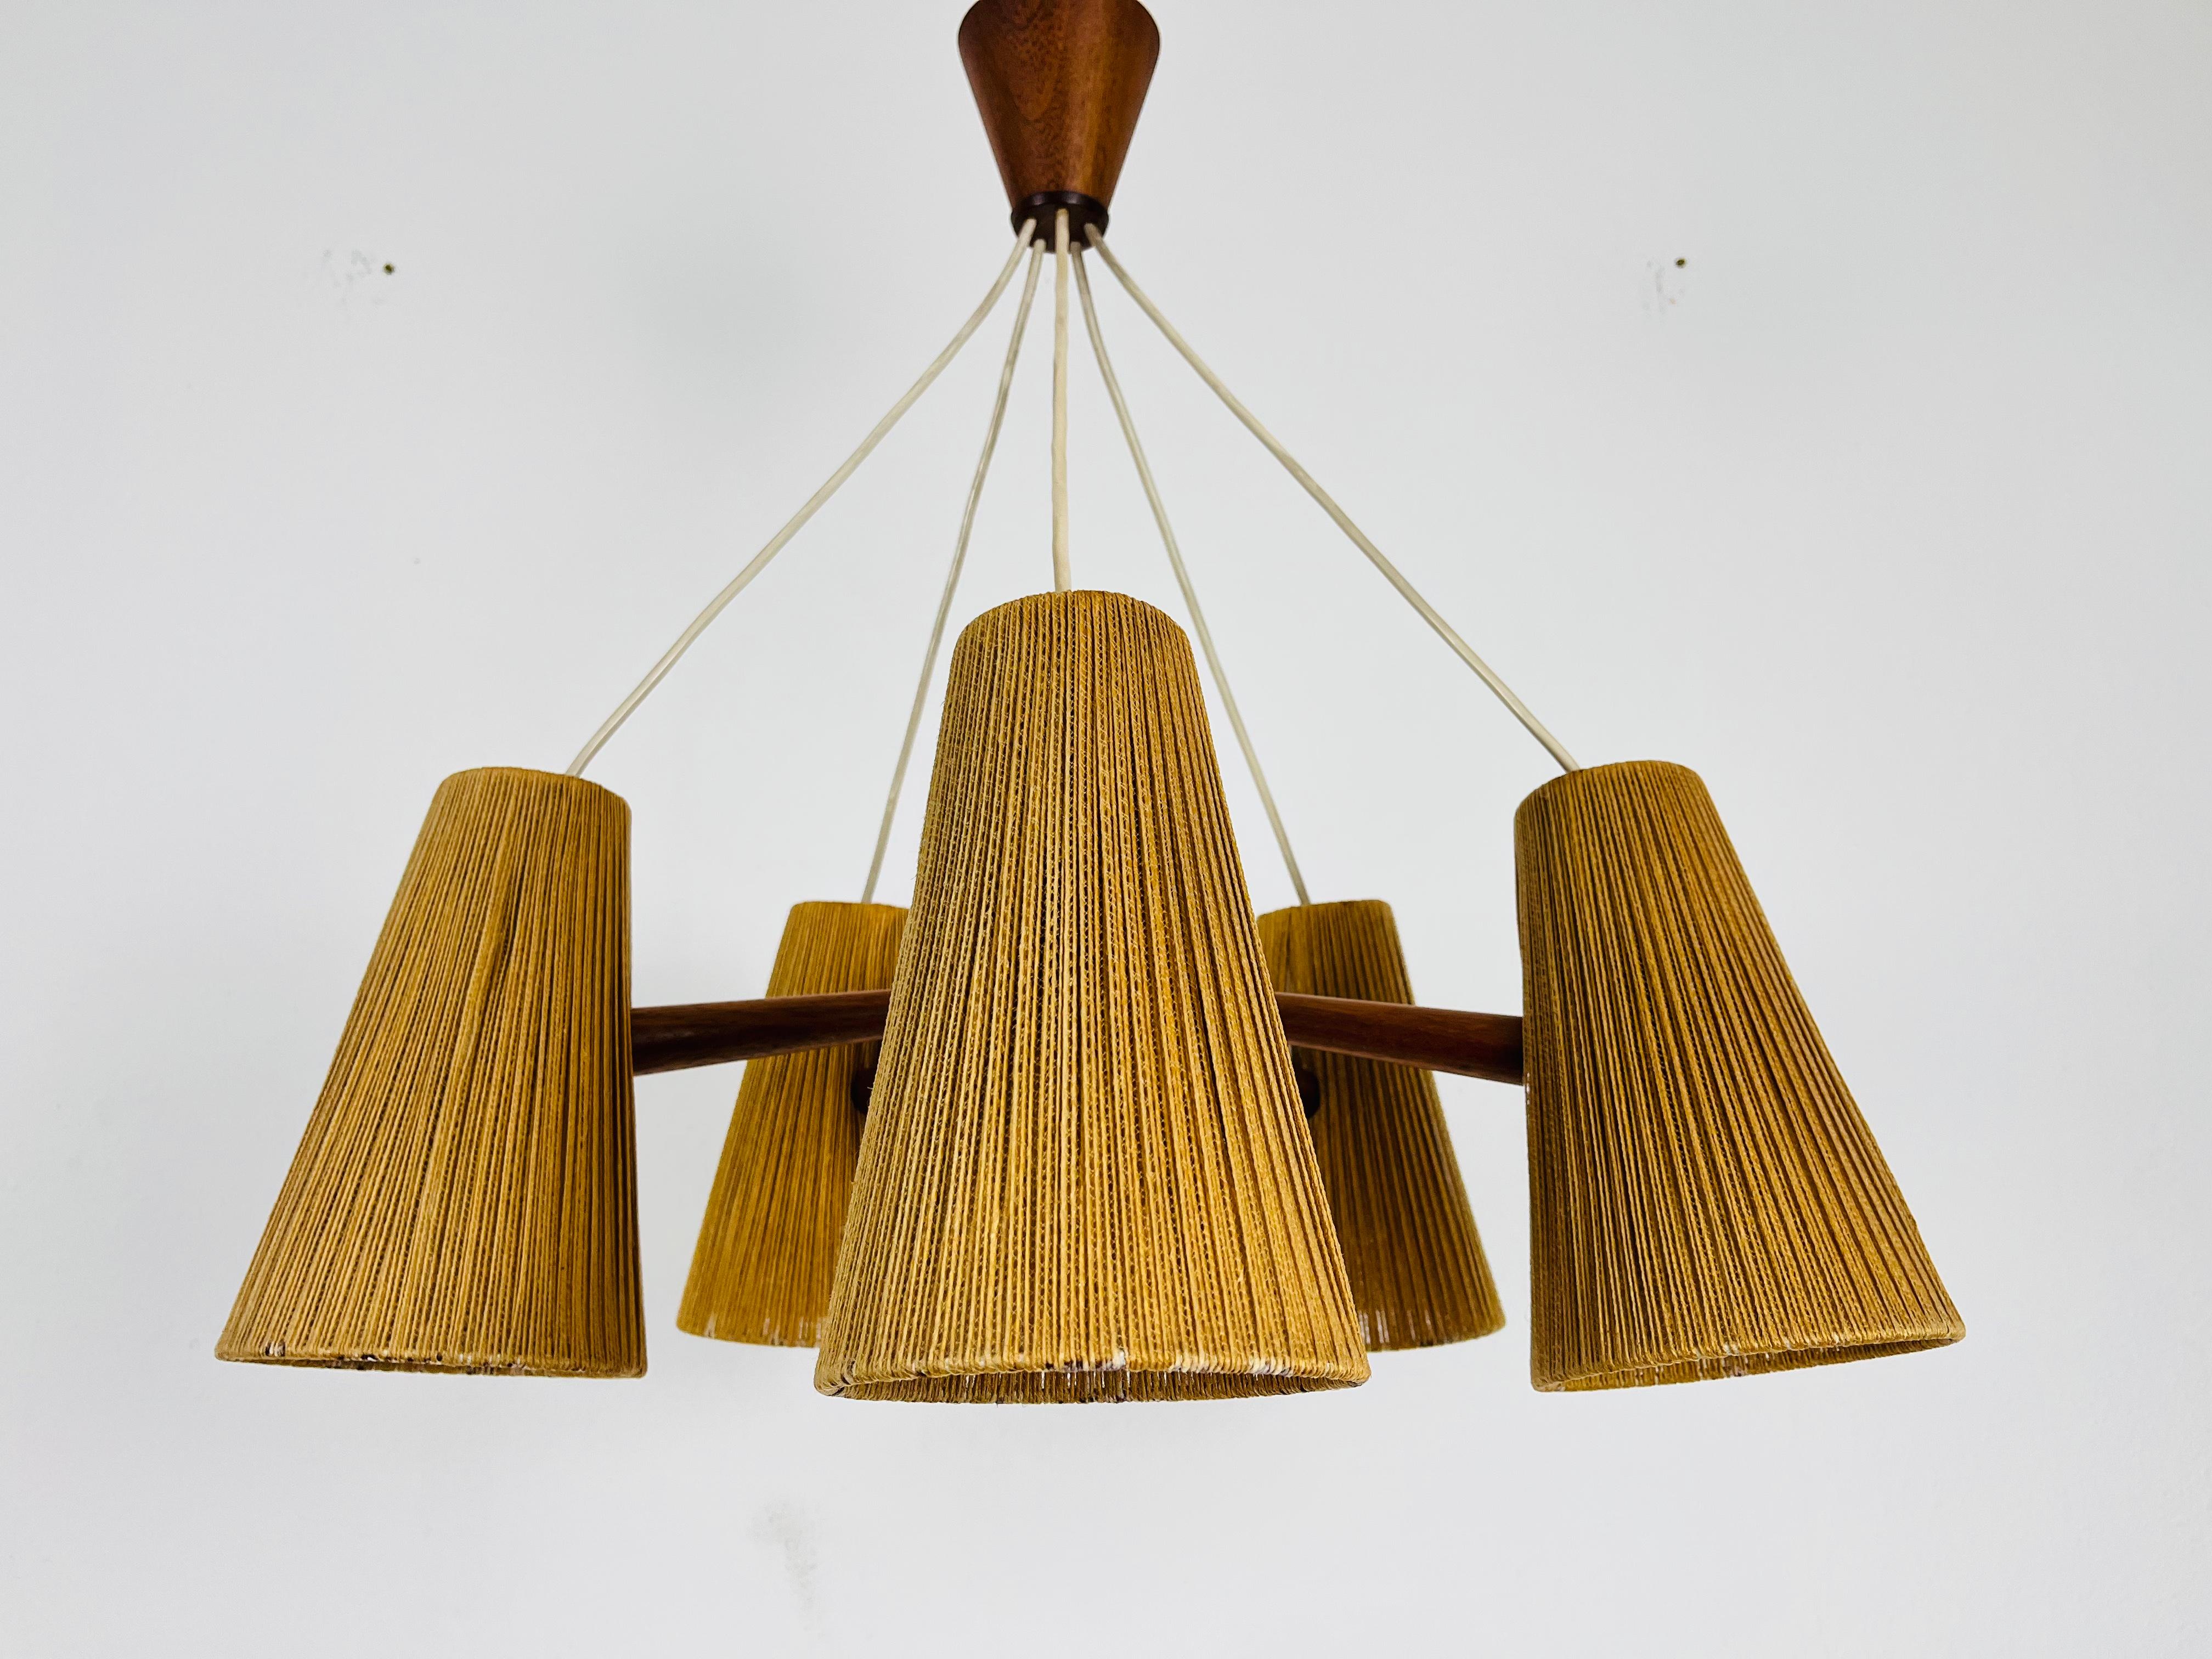 A wonderful suisse teak hanging lamp made by Temde in the 1960s. It is fascinating with its rare cone lamp shades. The body of the lamp is made of teak.

The light requires five E27 light bulbs. Works with both 120V/220V. Very good vintage